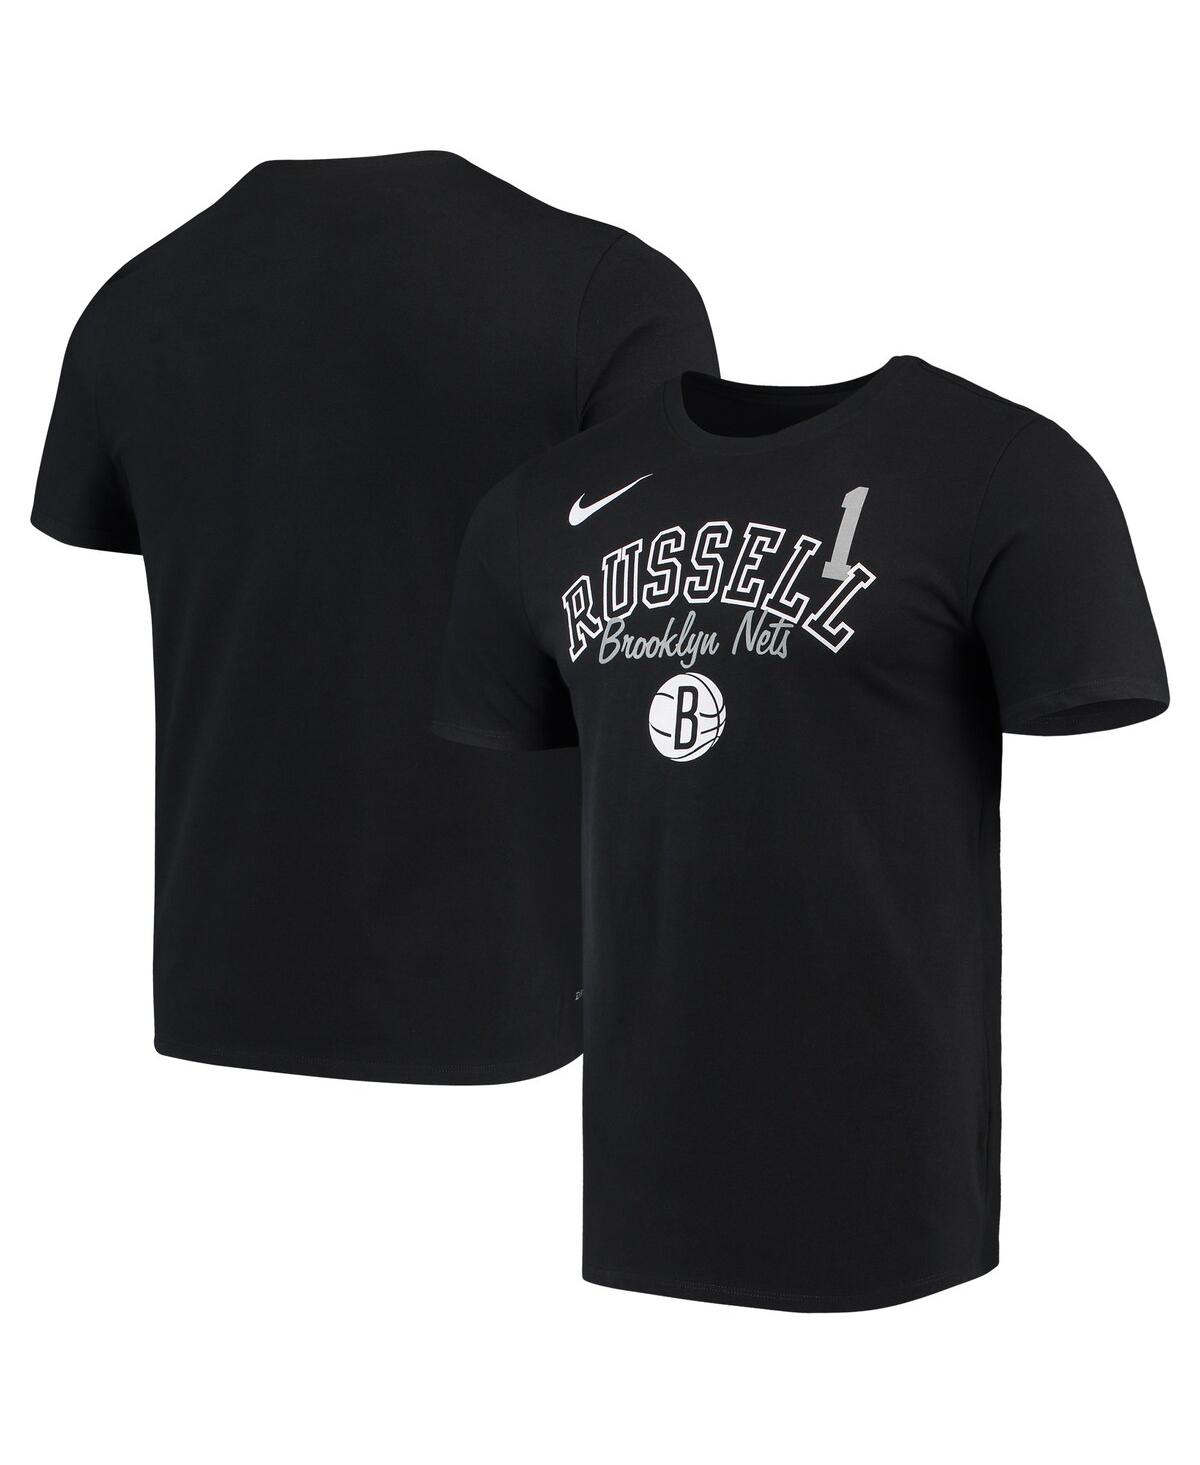 UPC 194305000039 product image for Men's Nike D'Angelo Russell Black Brooklyn Nets Player Performance T-shirt | upcitemdb.com